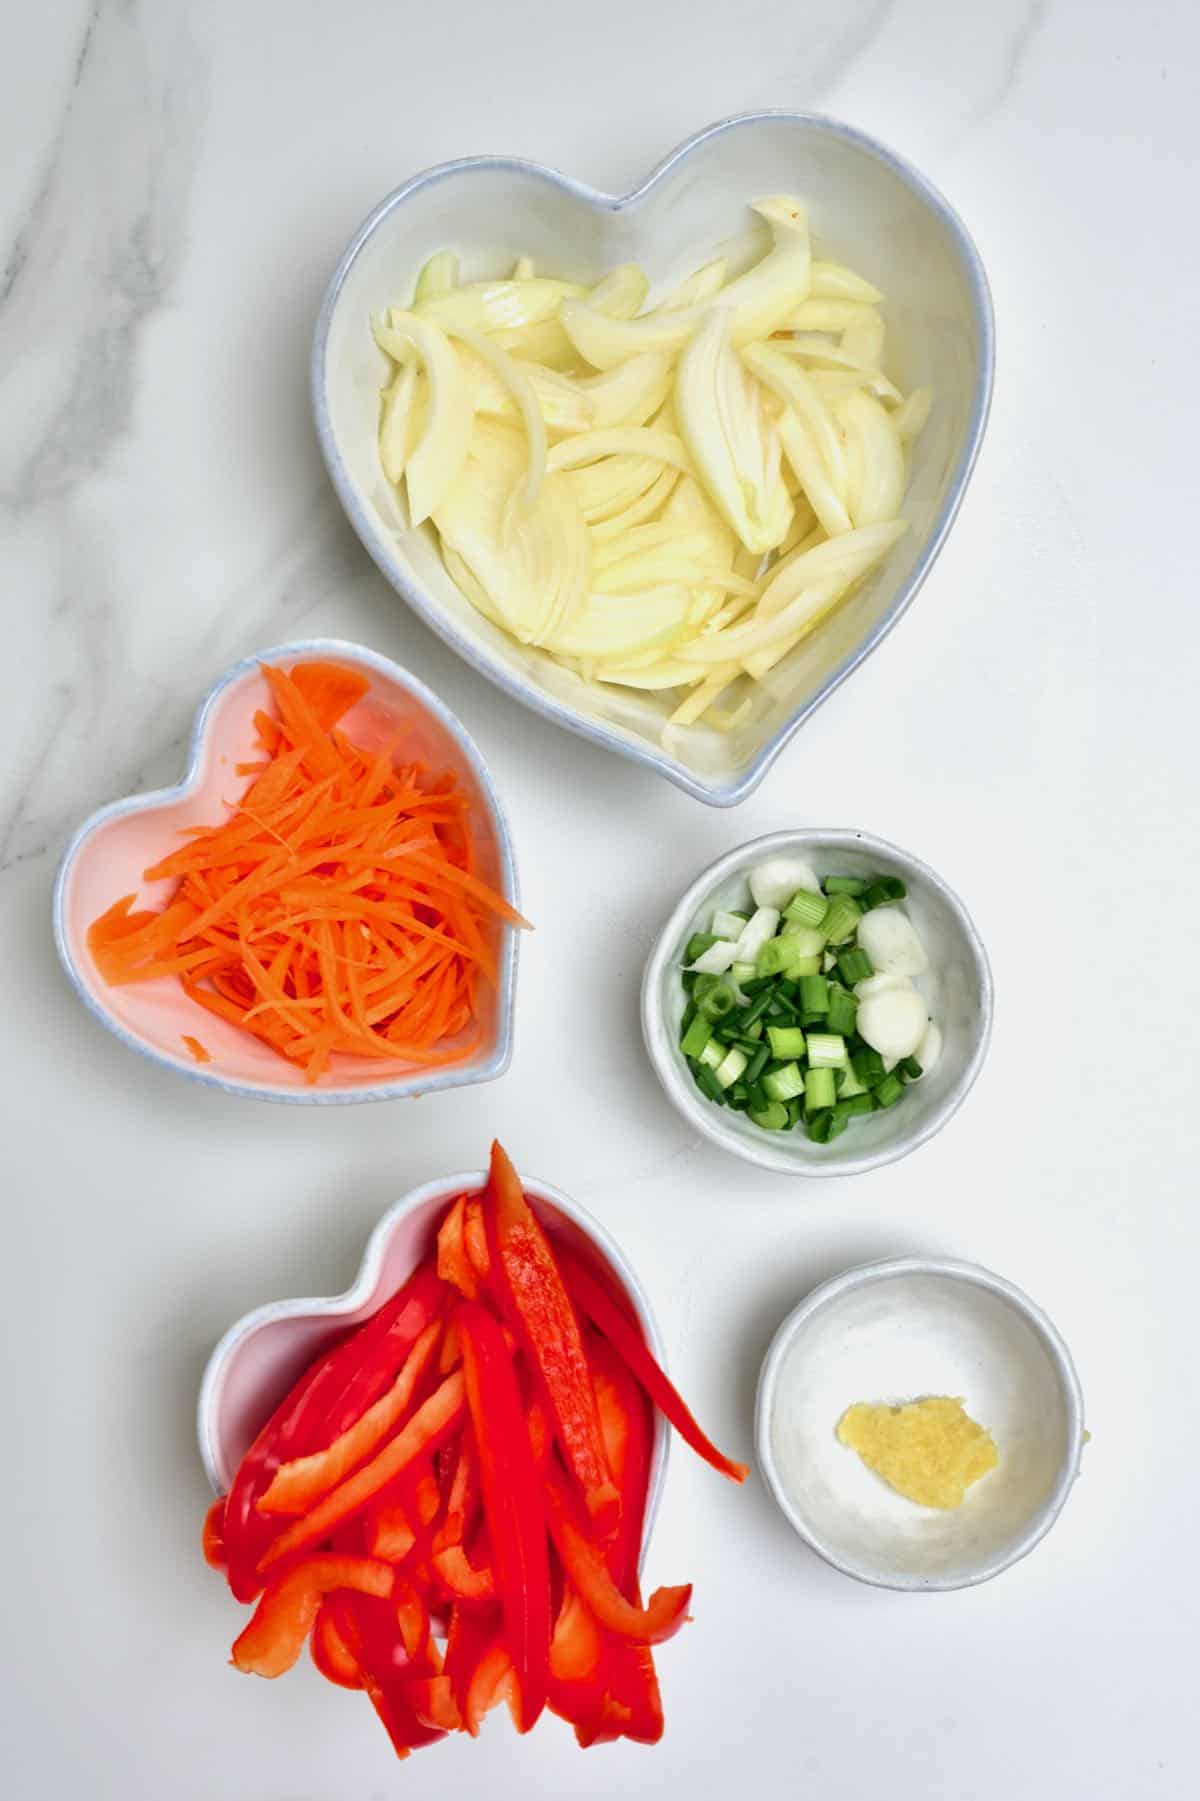 Chopped veggies for stirfry noodles